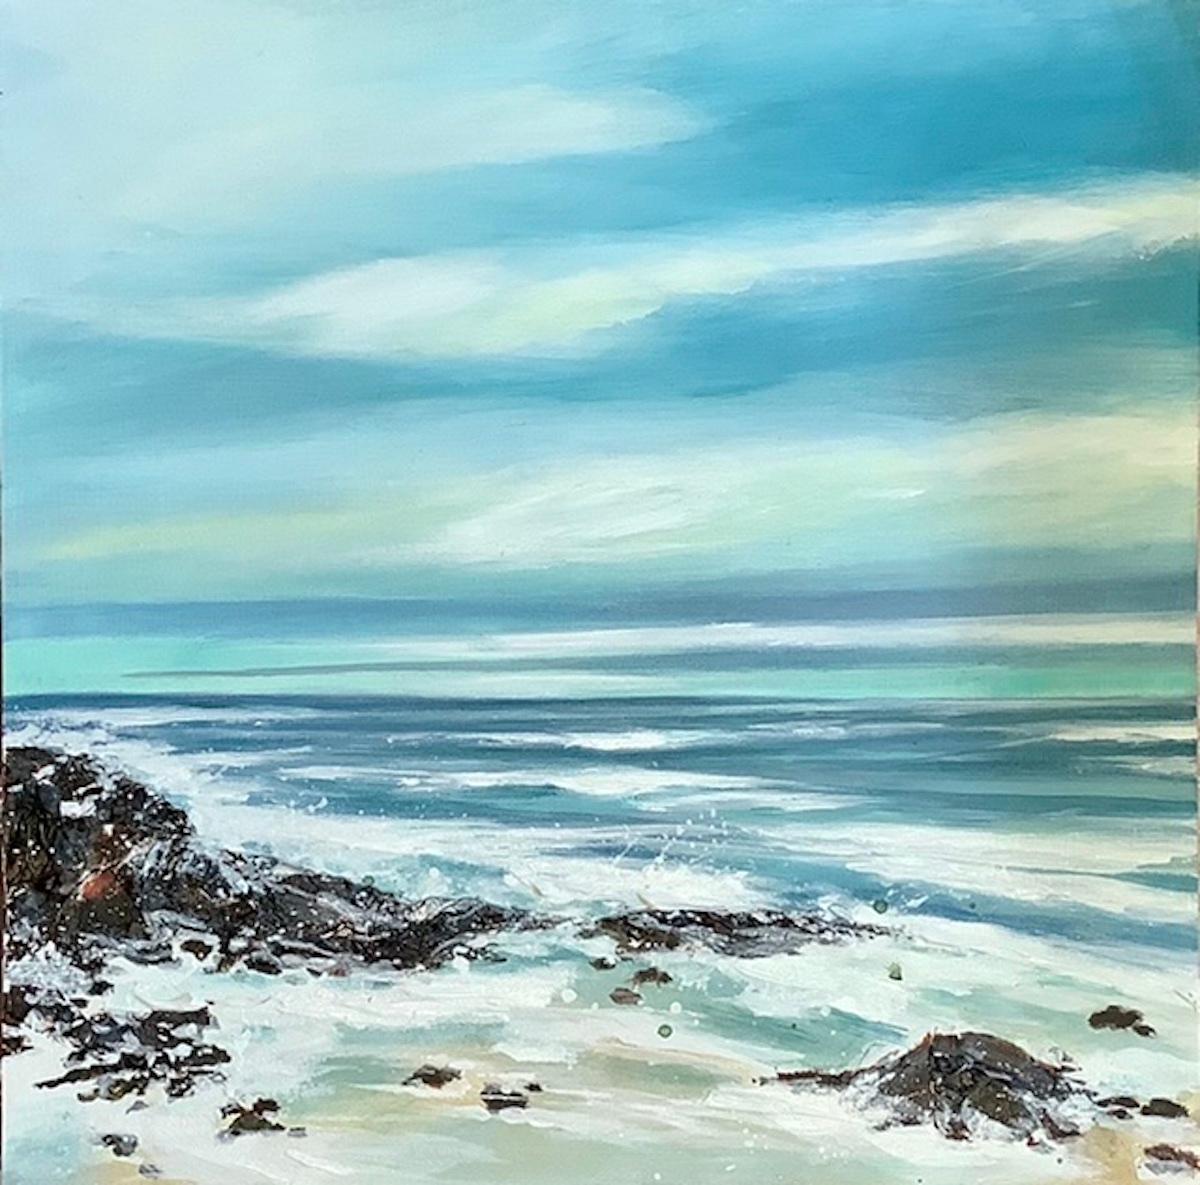 Priests Cove 1 by Adele Riley, contemporary art, original painting, seascape art